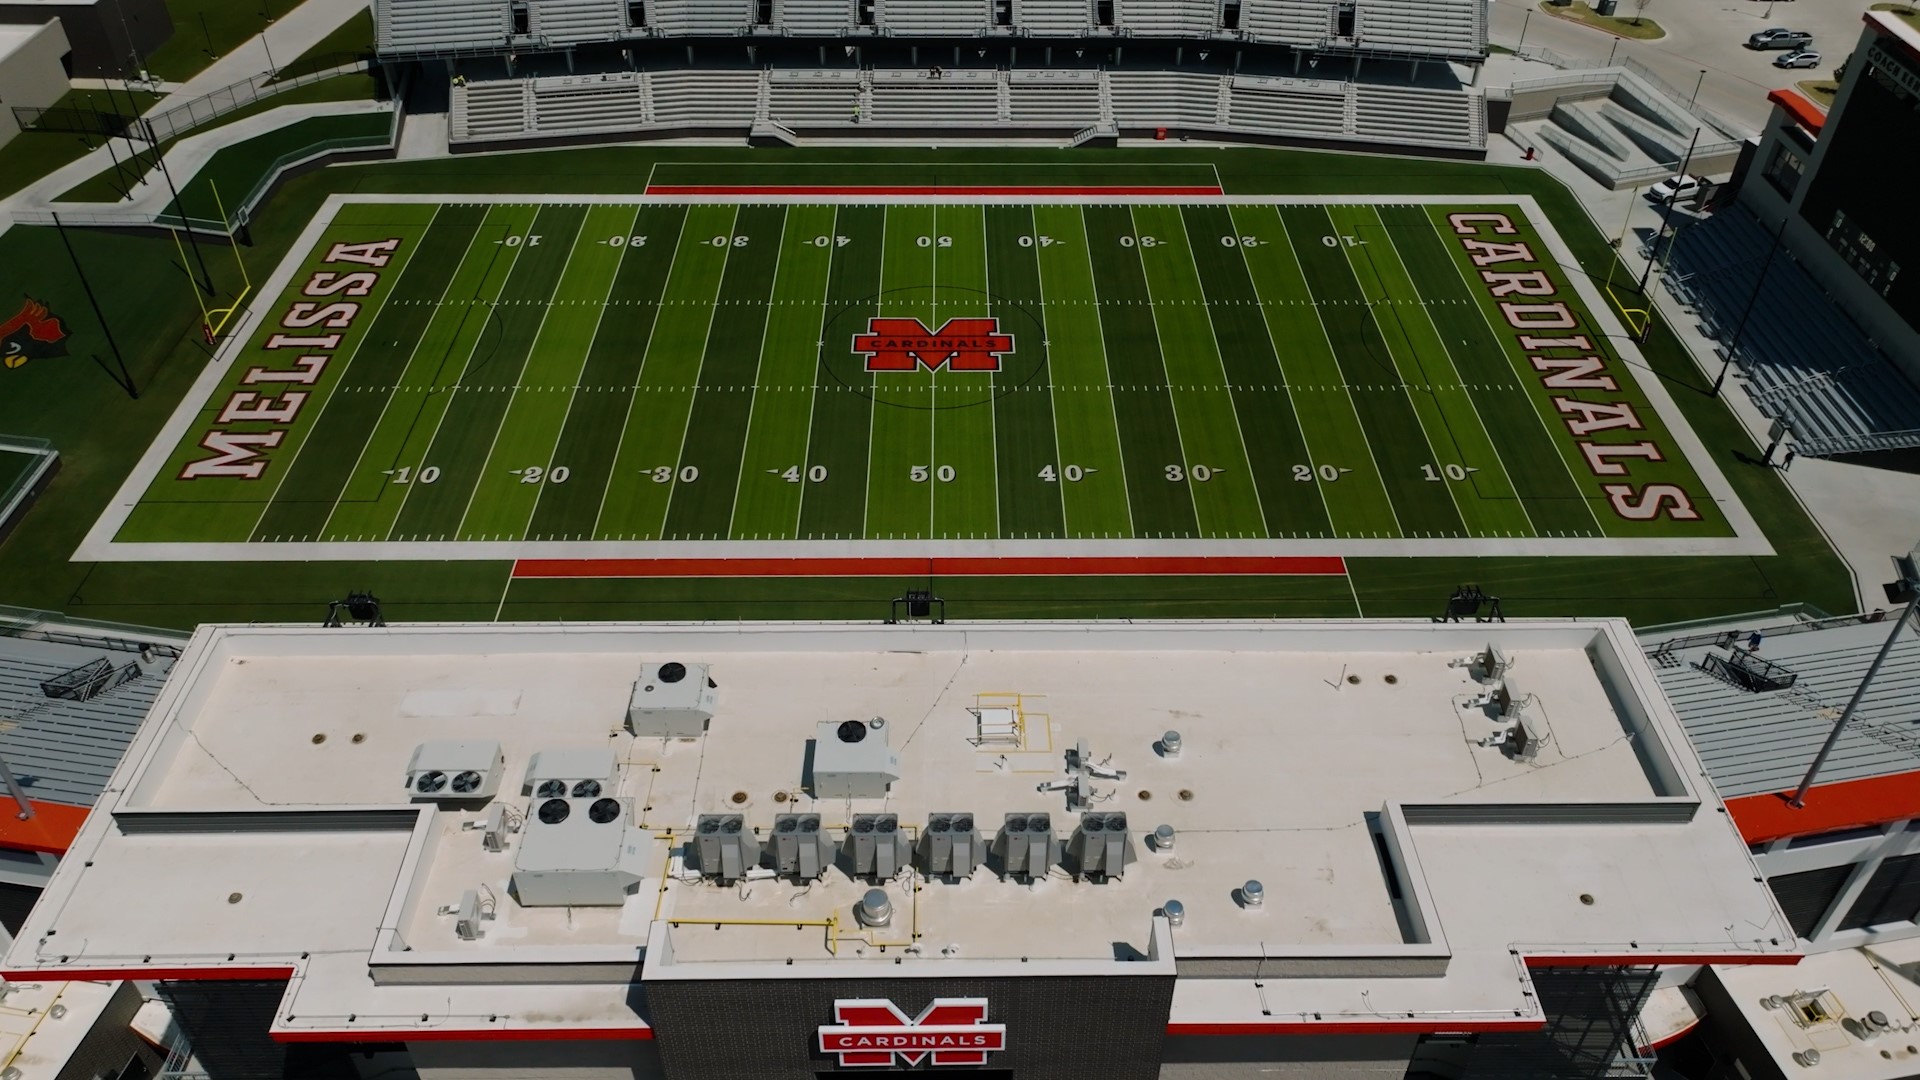 Drone Video Shows New Texas High School Football Stadium That Has Gone Viral 